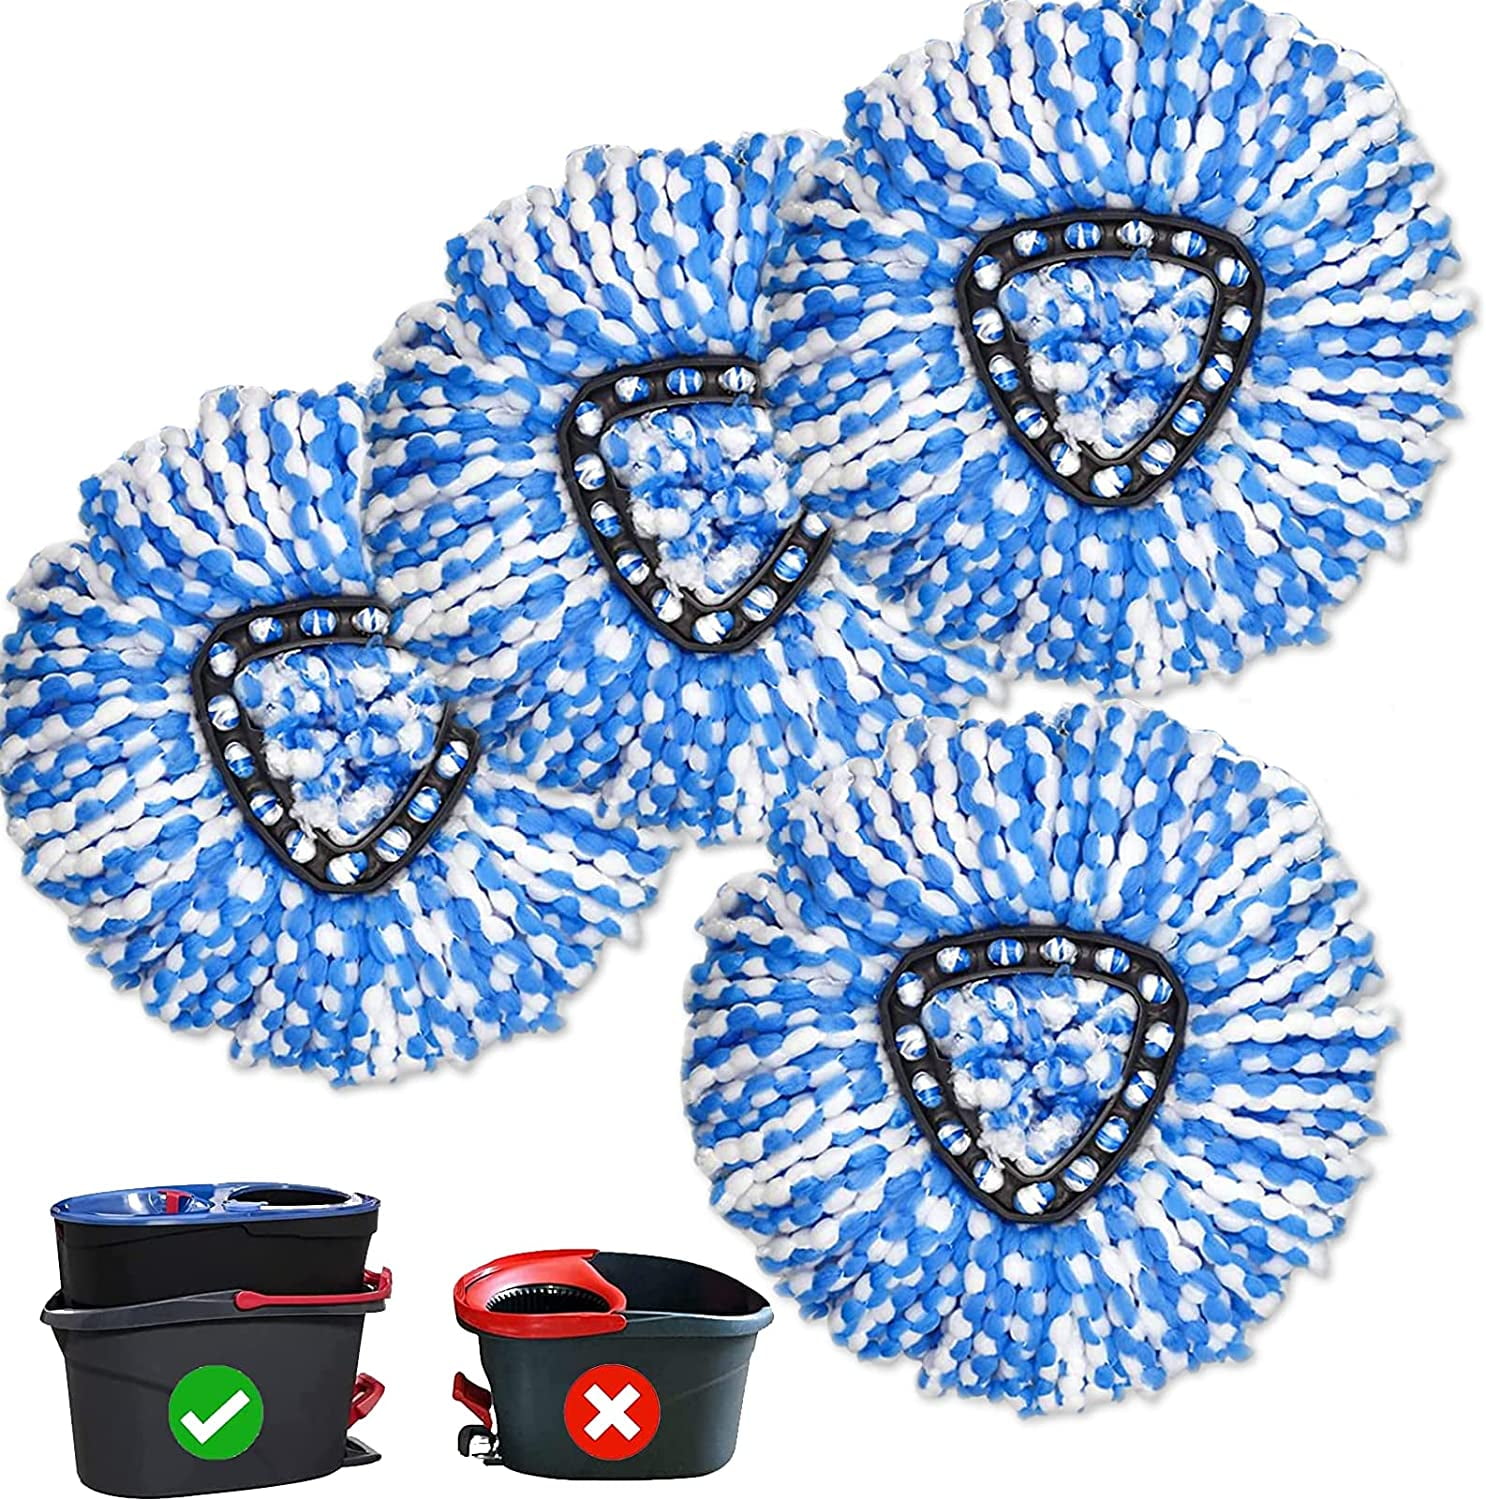 New Blue BLUTENET 4 Pack Rinse Clean Spin mop Replacement Head for 2-Tank System EasyWring Microfiber Spin Mop Refill 